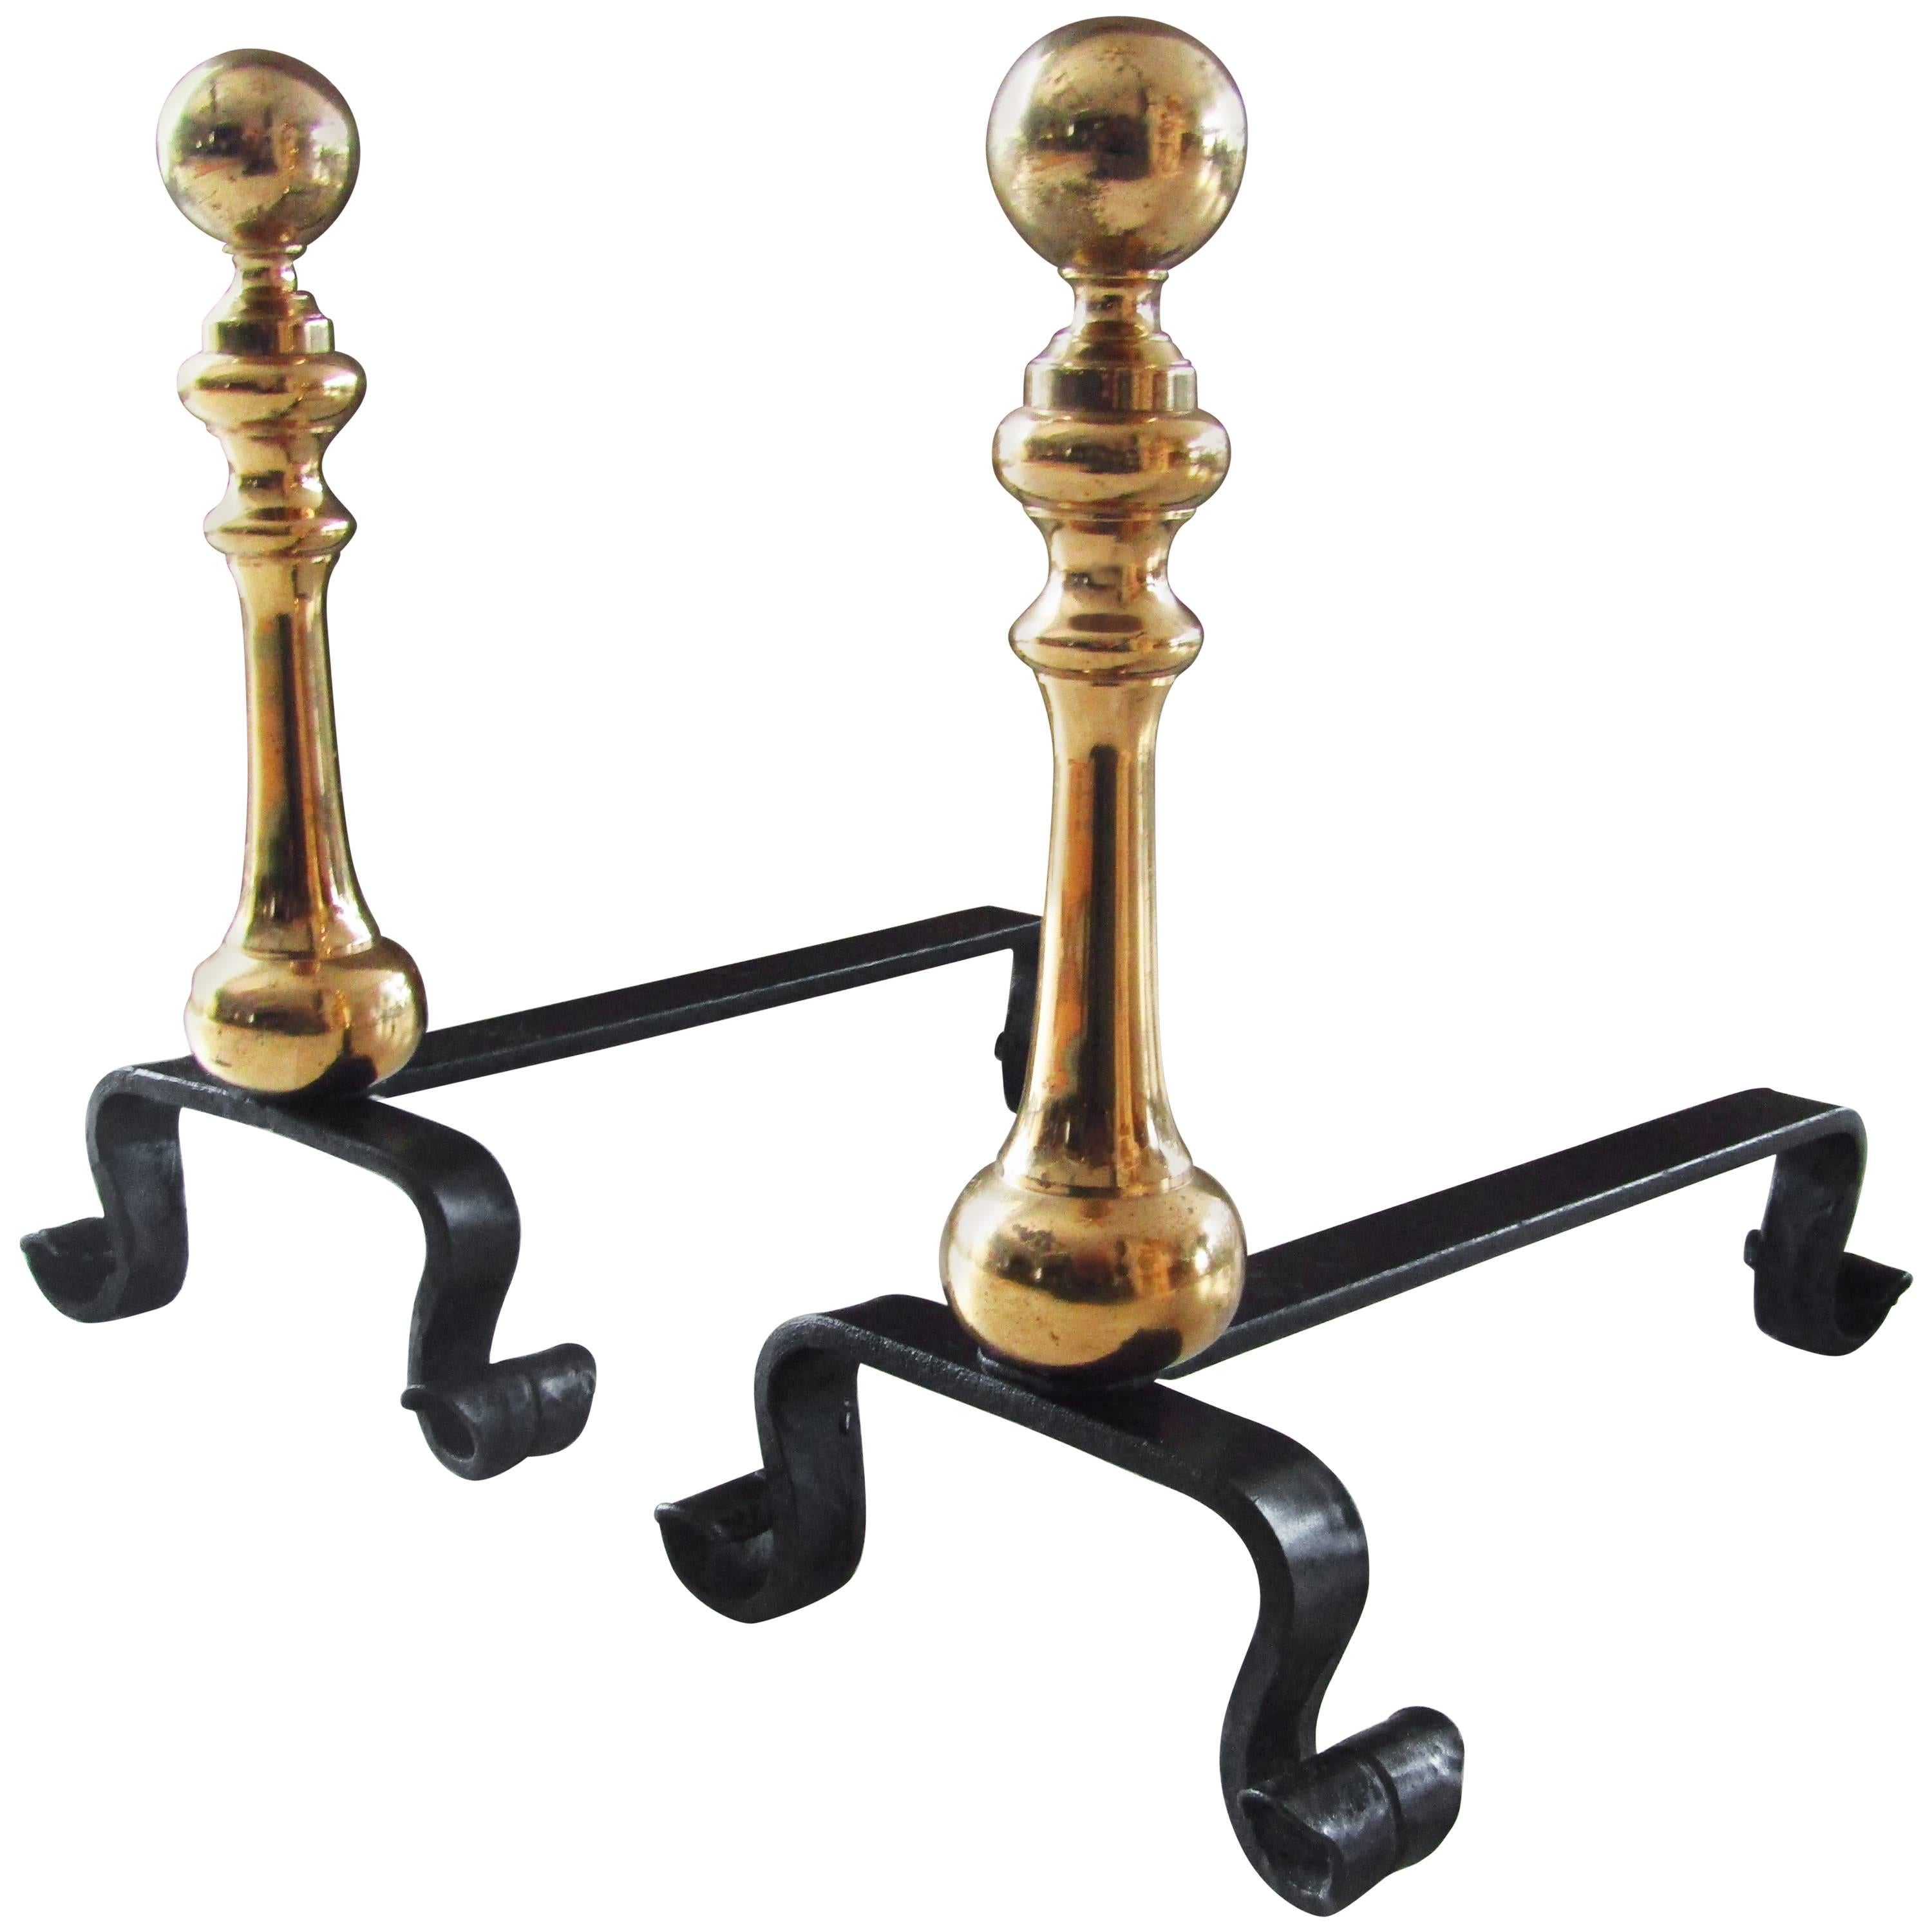 Pair of Wrought Iron and Brass Andirons, France, 1890